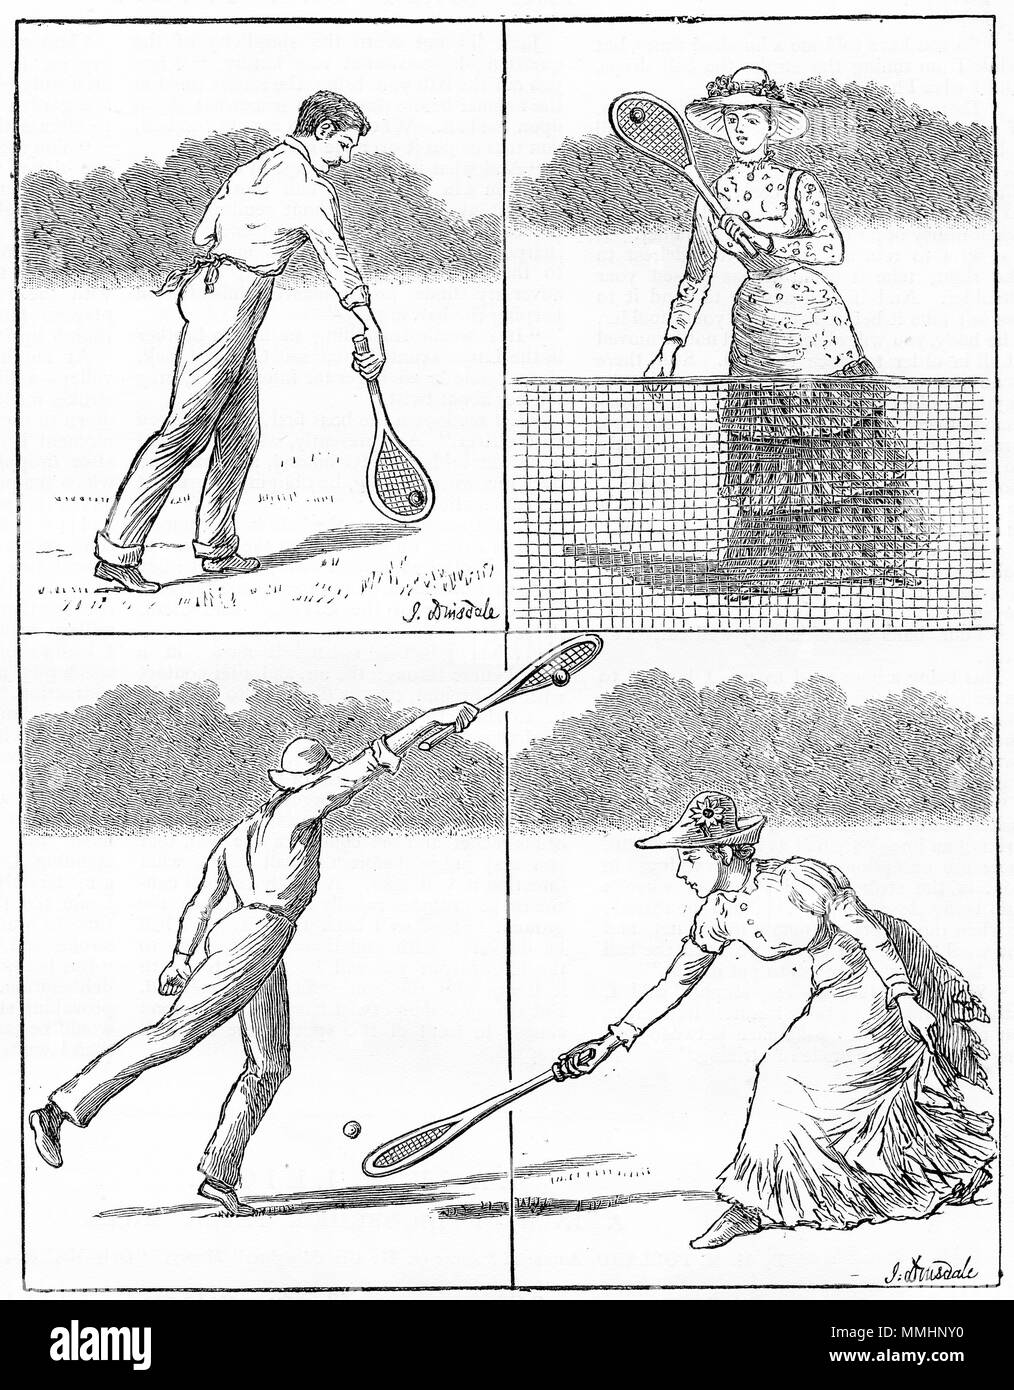 Engraving of various plays for the game of lawn tennis. From an original engraving in the Girl's Own Paper magazine 1882. Stock Photo